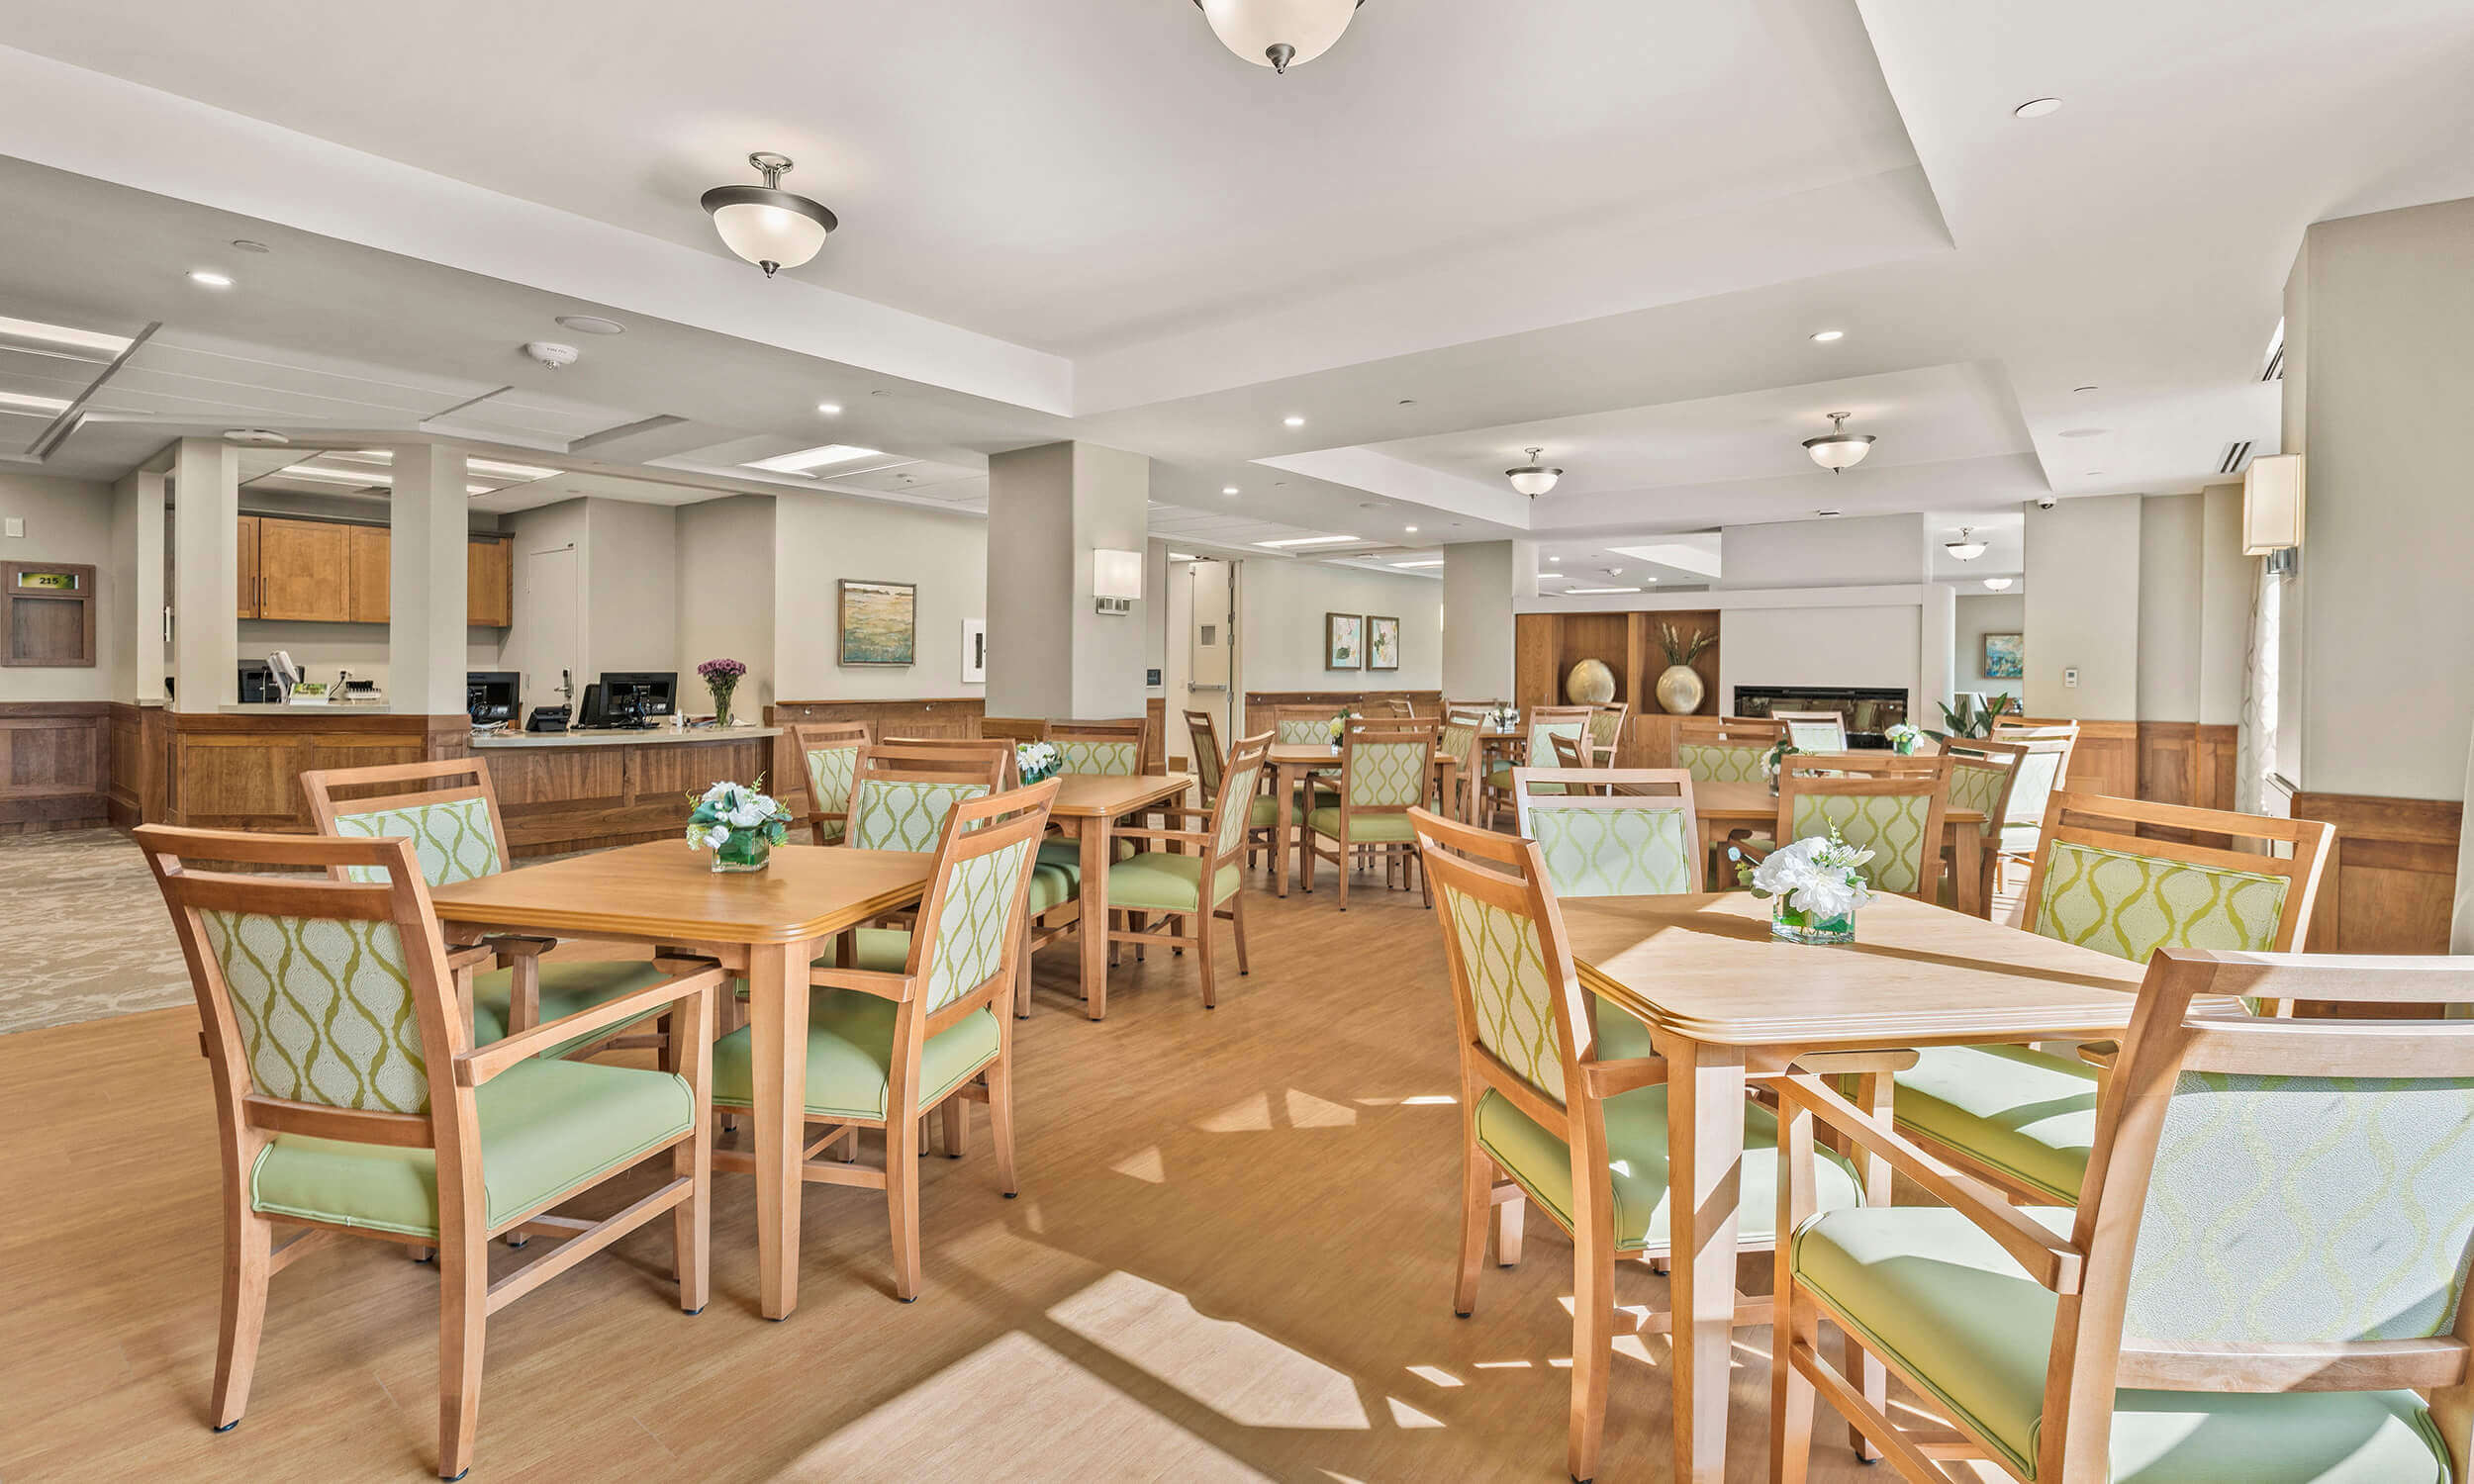 Dining room of retirement home with eight wooden set tables and chairs with green cushioning